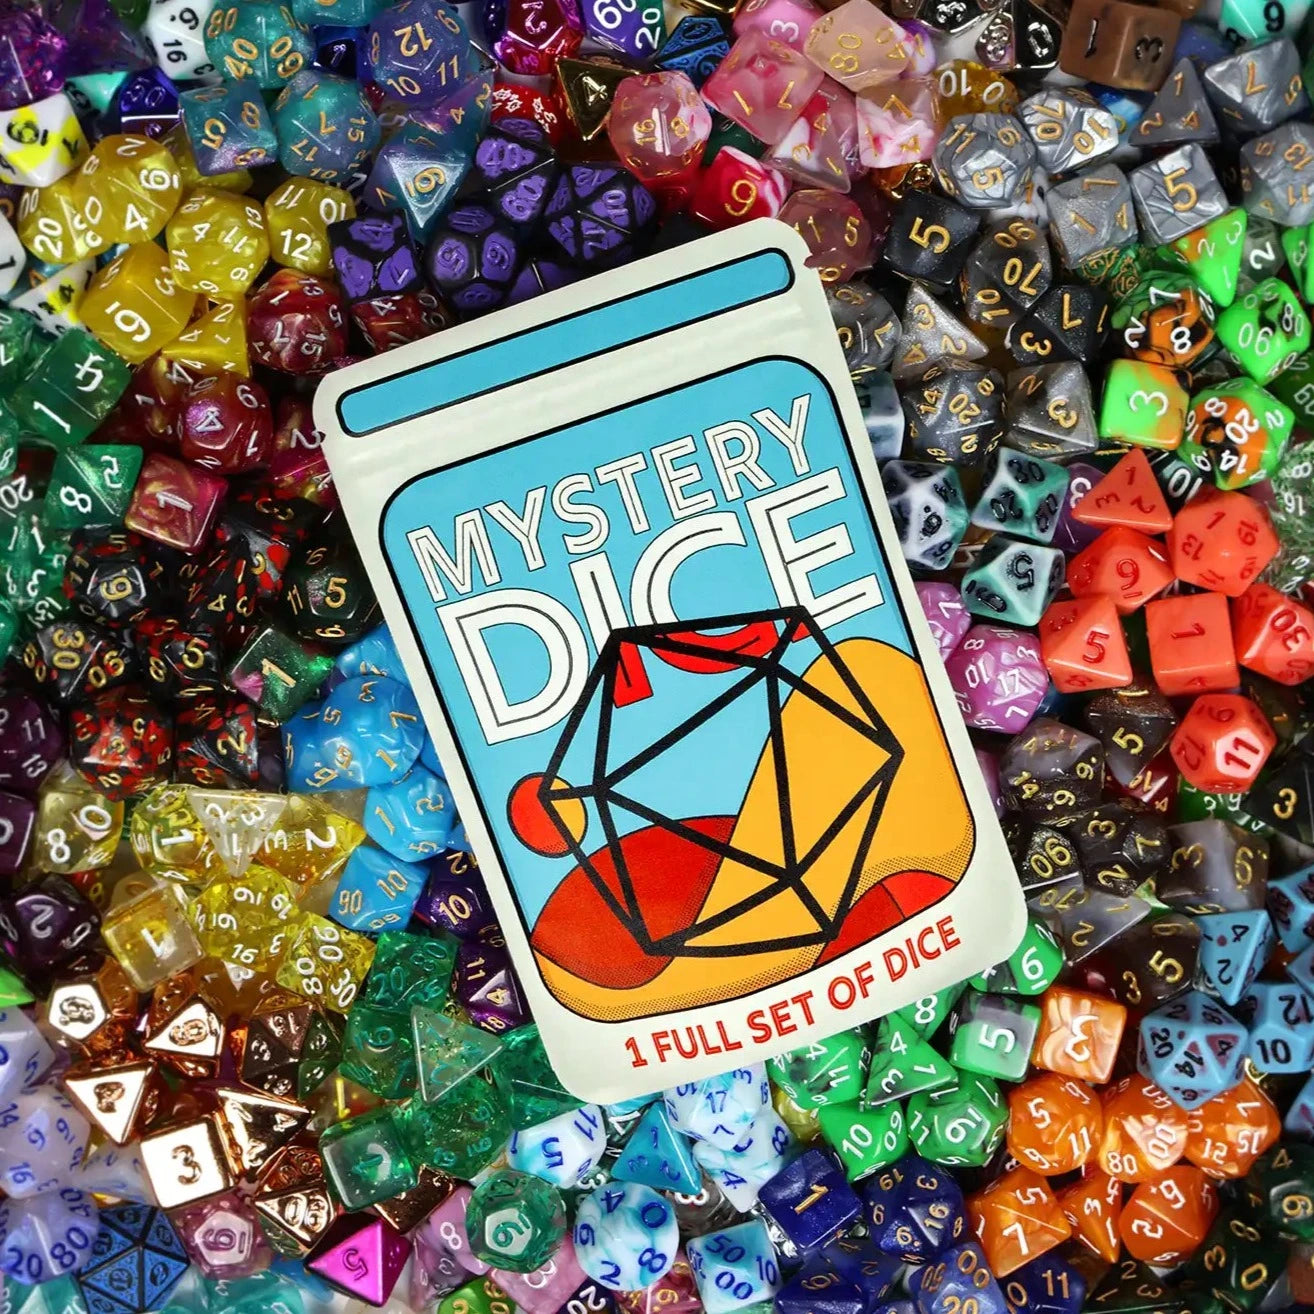 Mystery Dice - 1985 Games